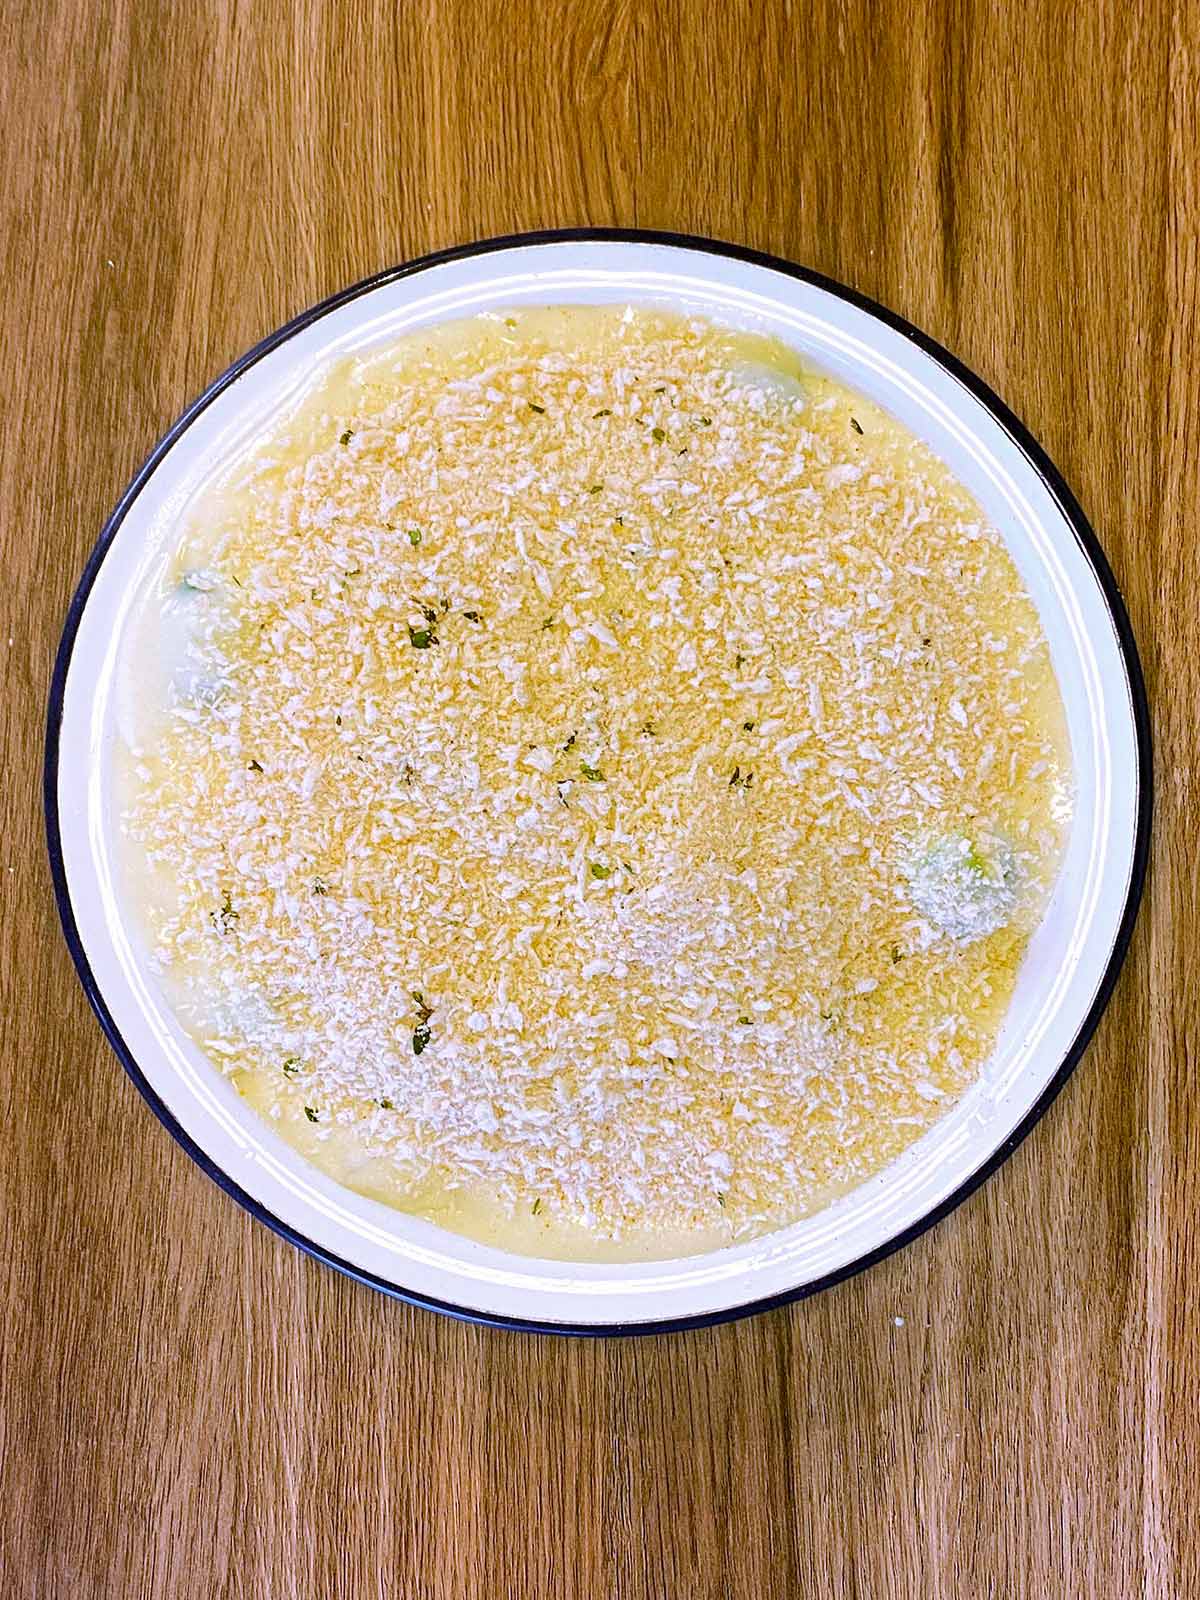 Breadcrumbs sprinkled over the top of the cheese sauce.